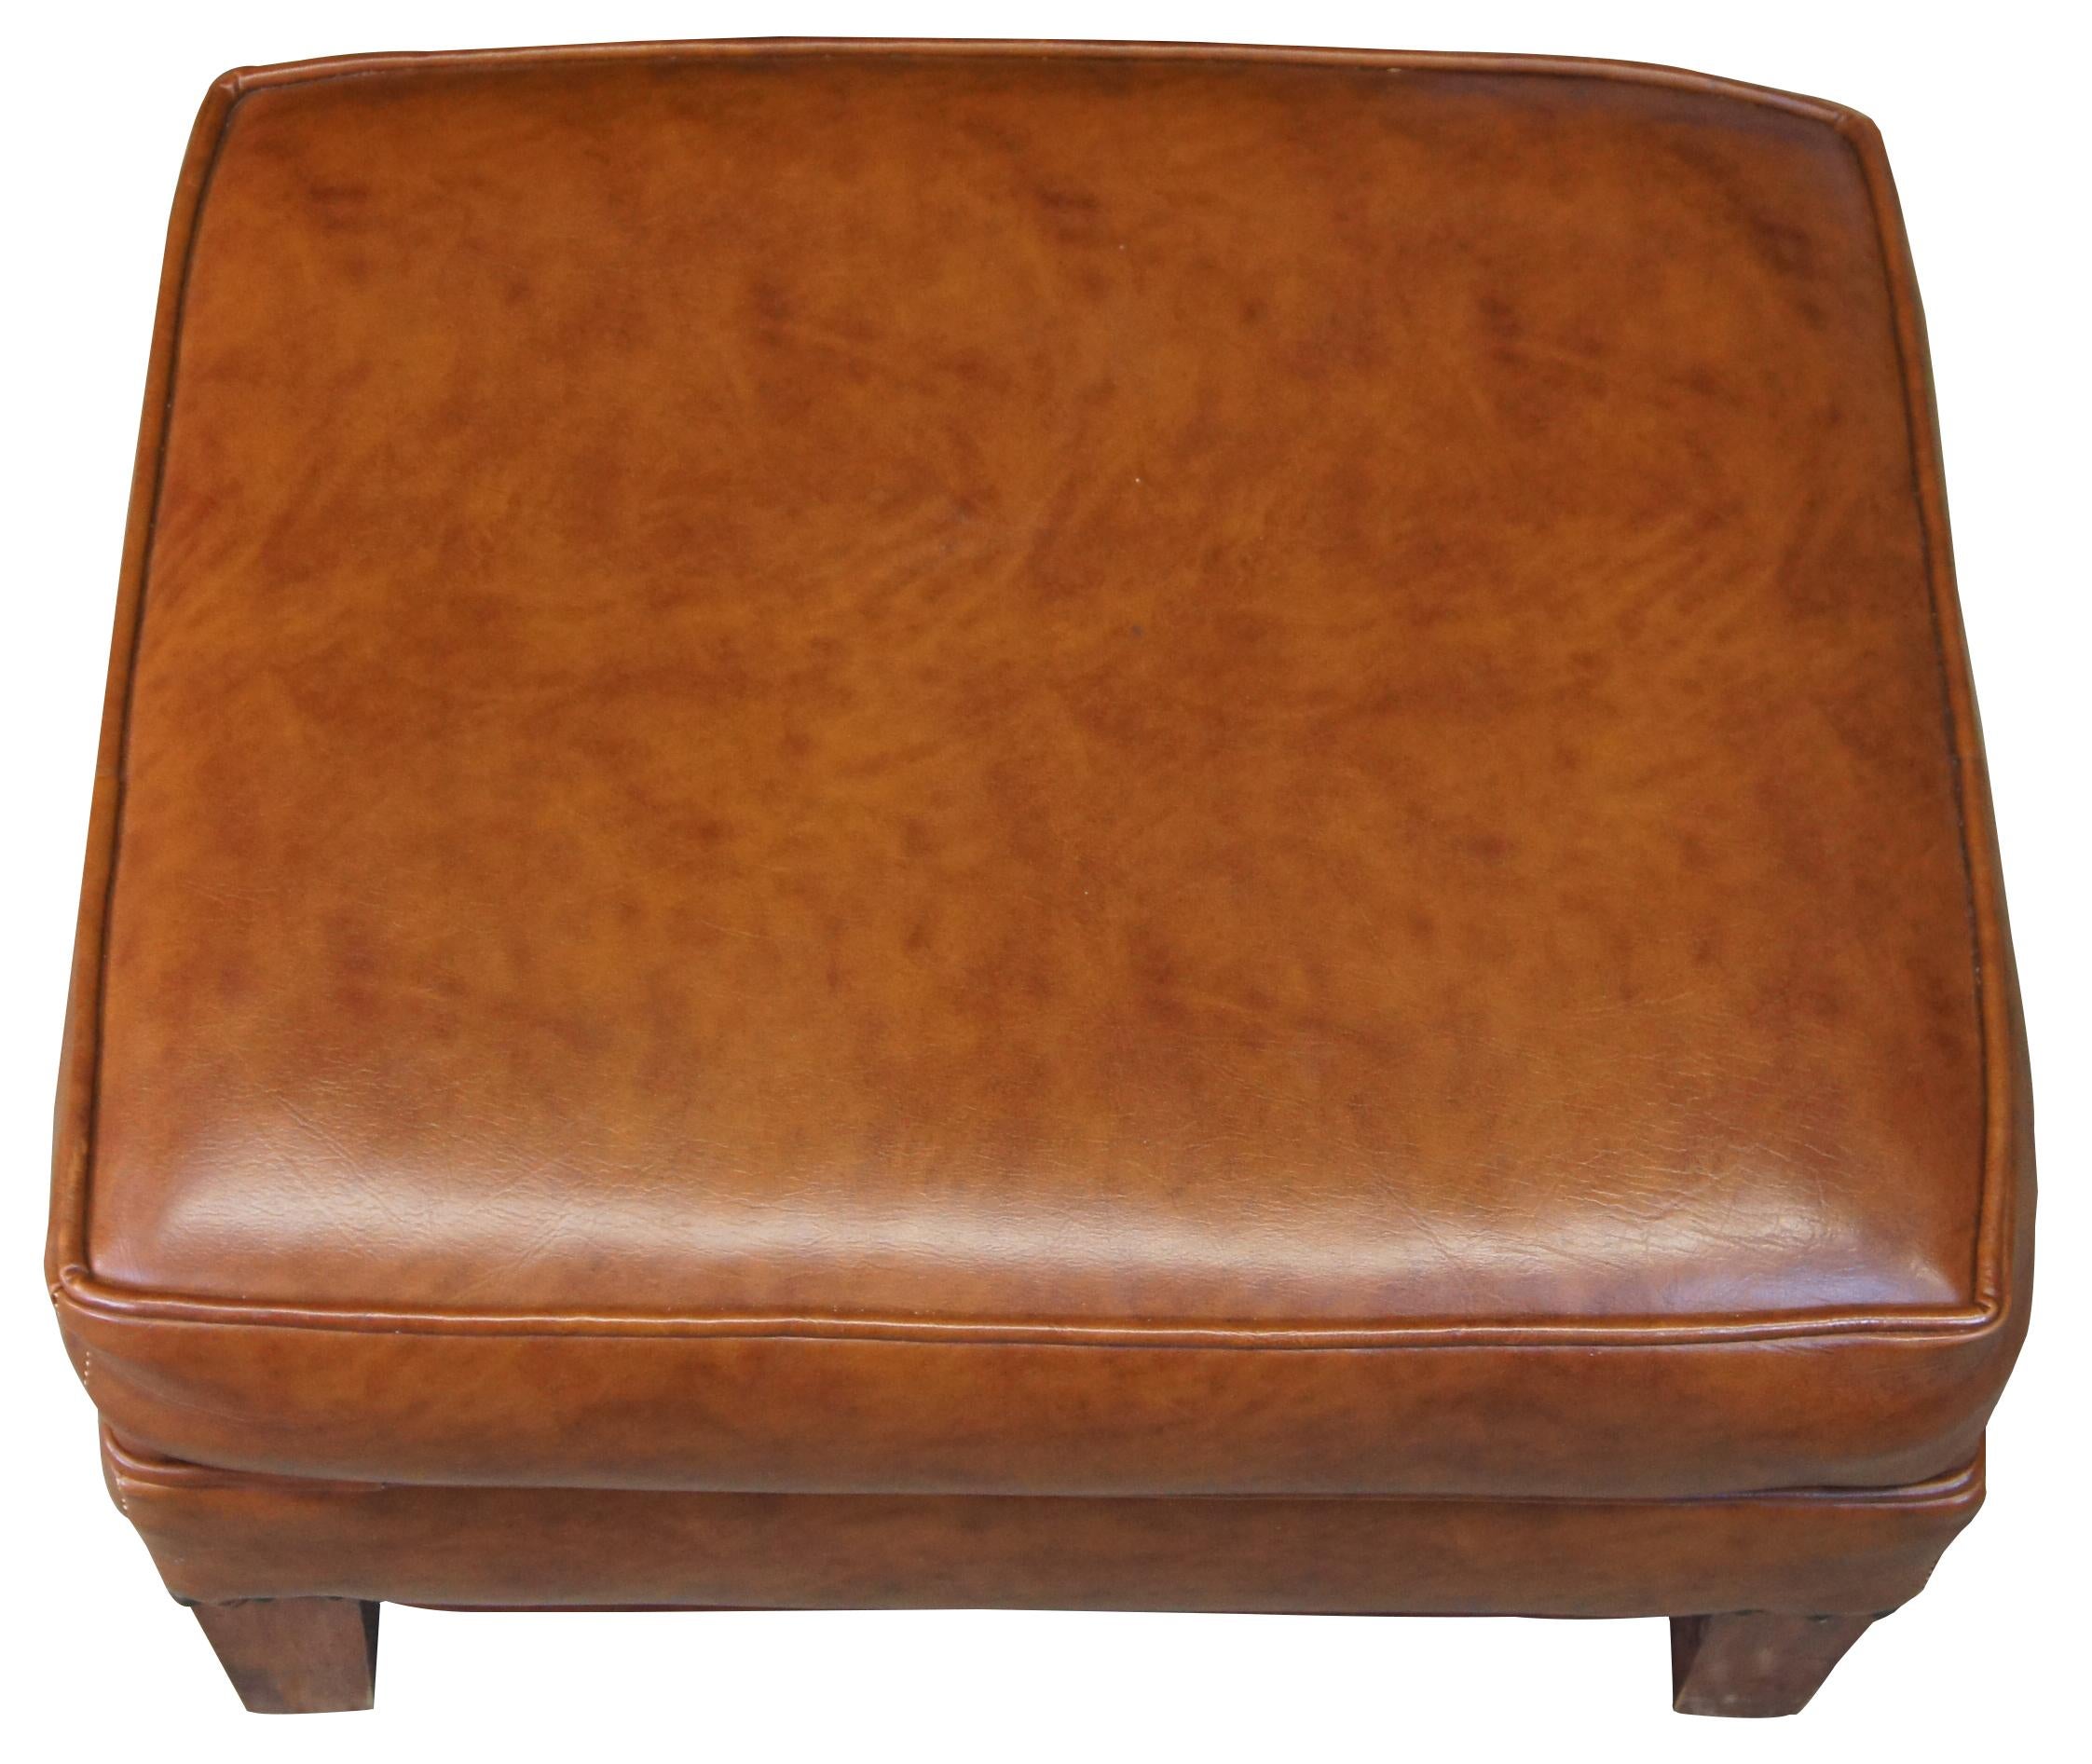 brown leather footstools